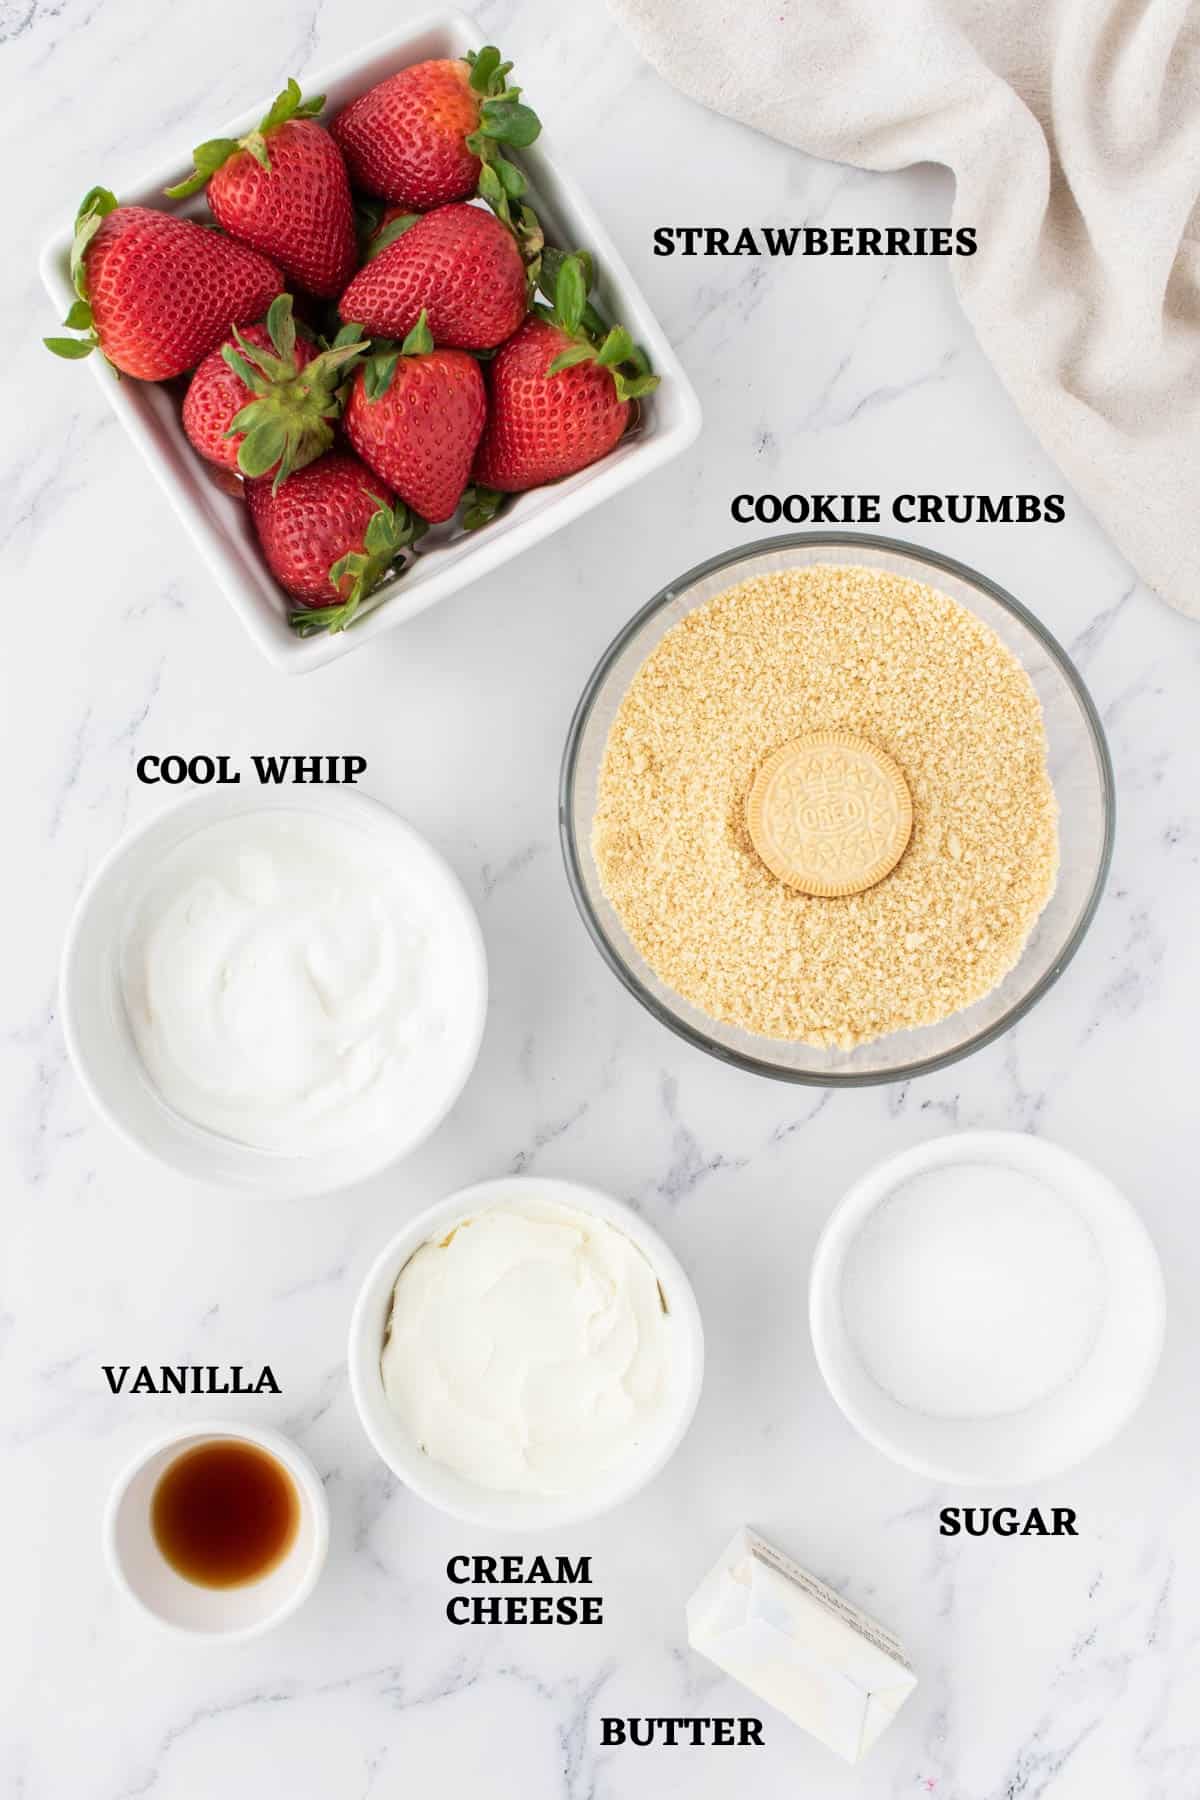 Labeled ingredients needed to make mini strawberry tartlets.